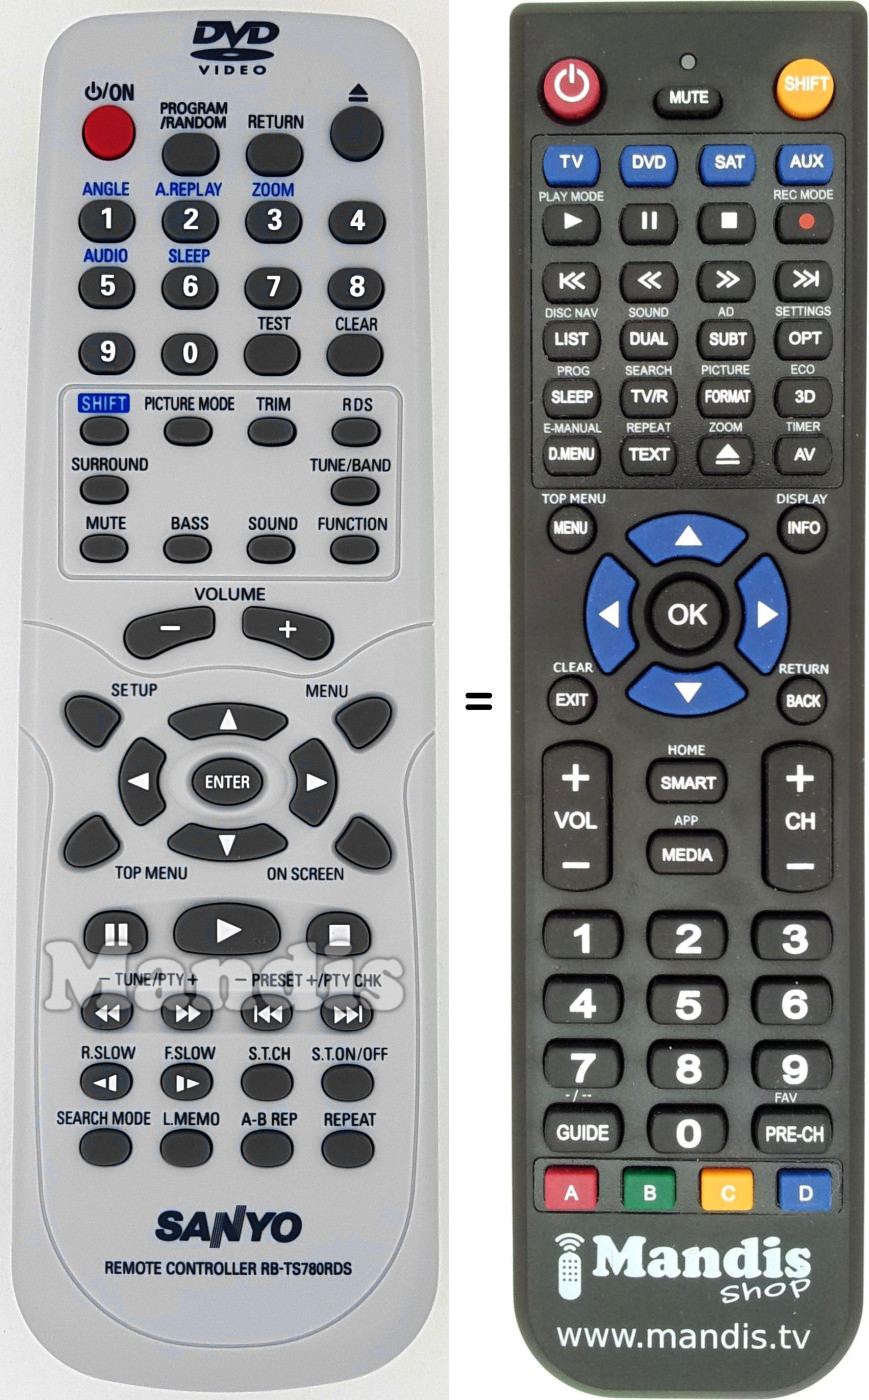 Replacement remote control RB-TS780RDS